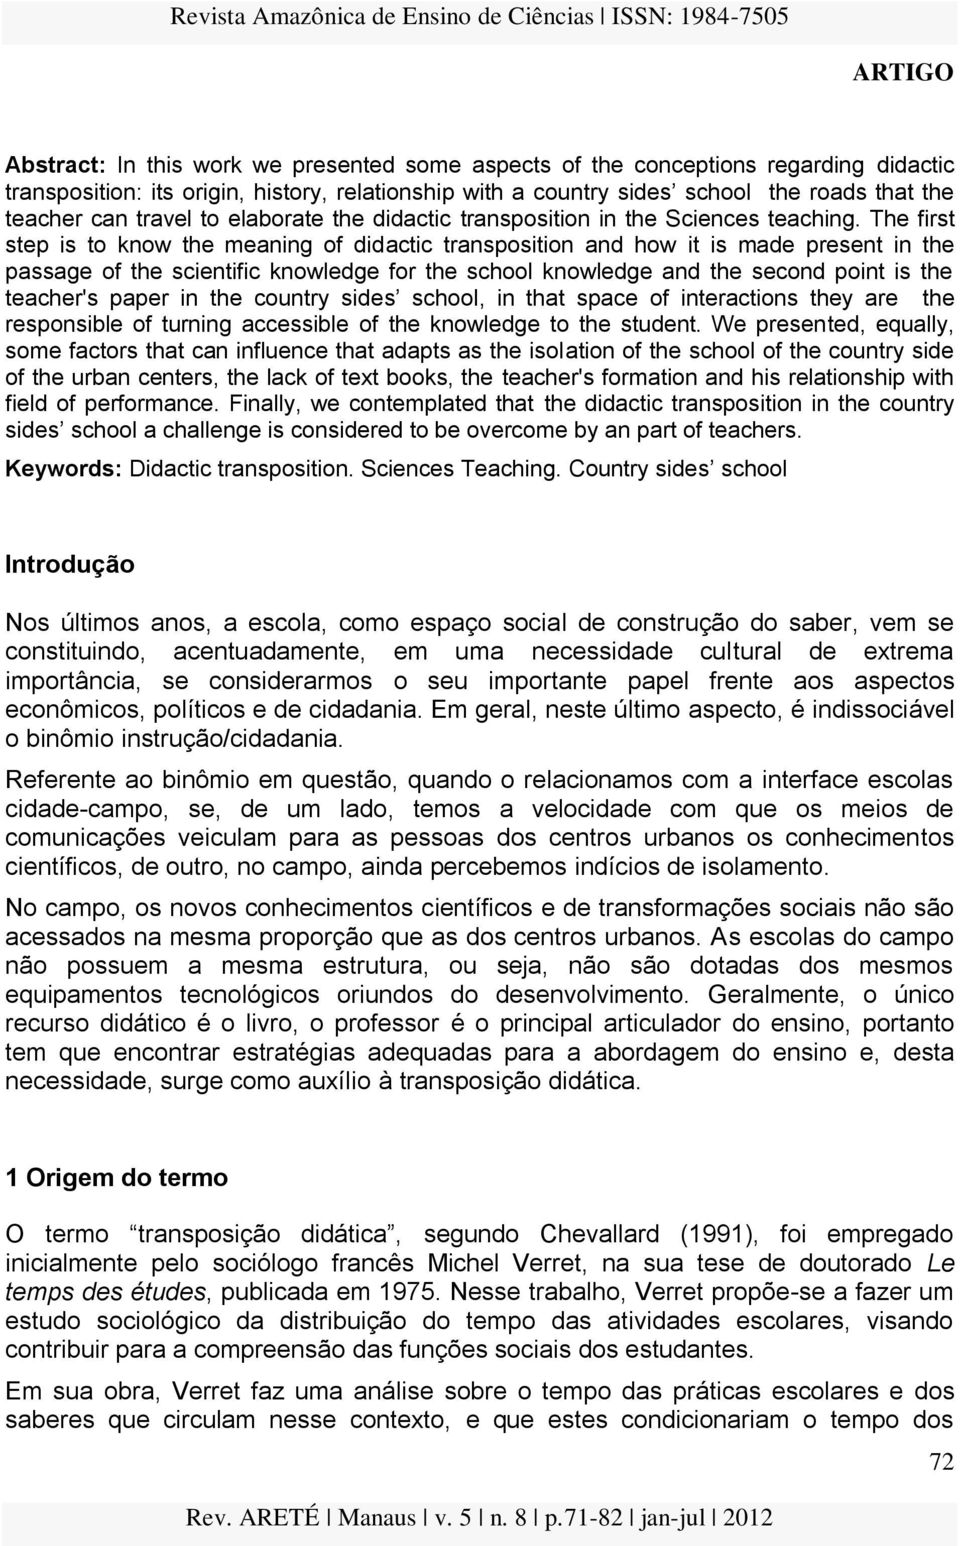 The first step is to know the meaning of didactic transposition and how it is made present in the passage of the scientific knowledge for the school knowledge and the second point is the teacher's